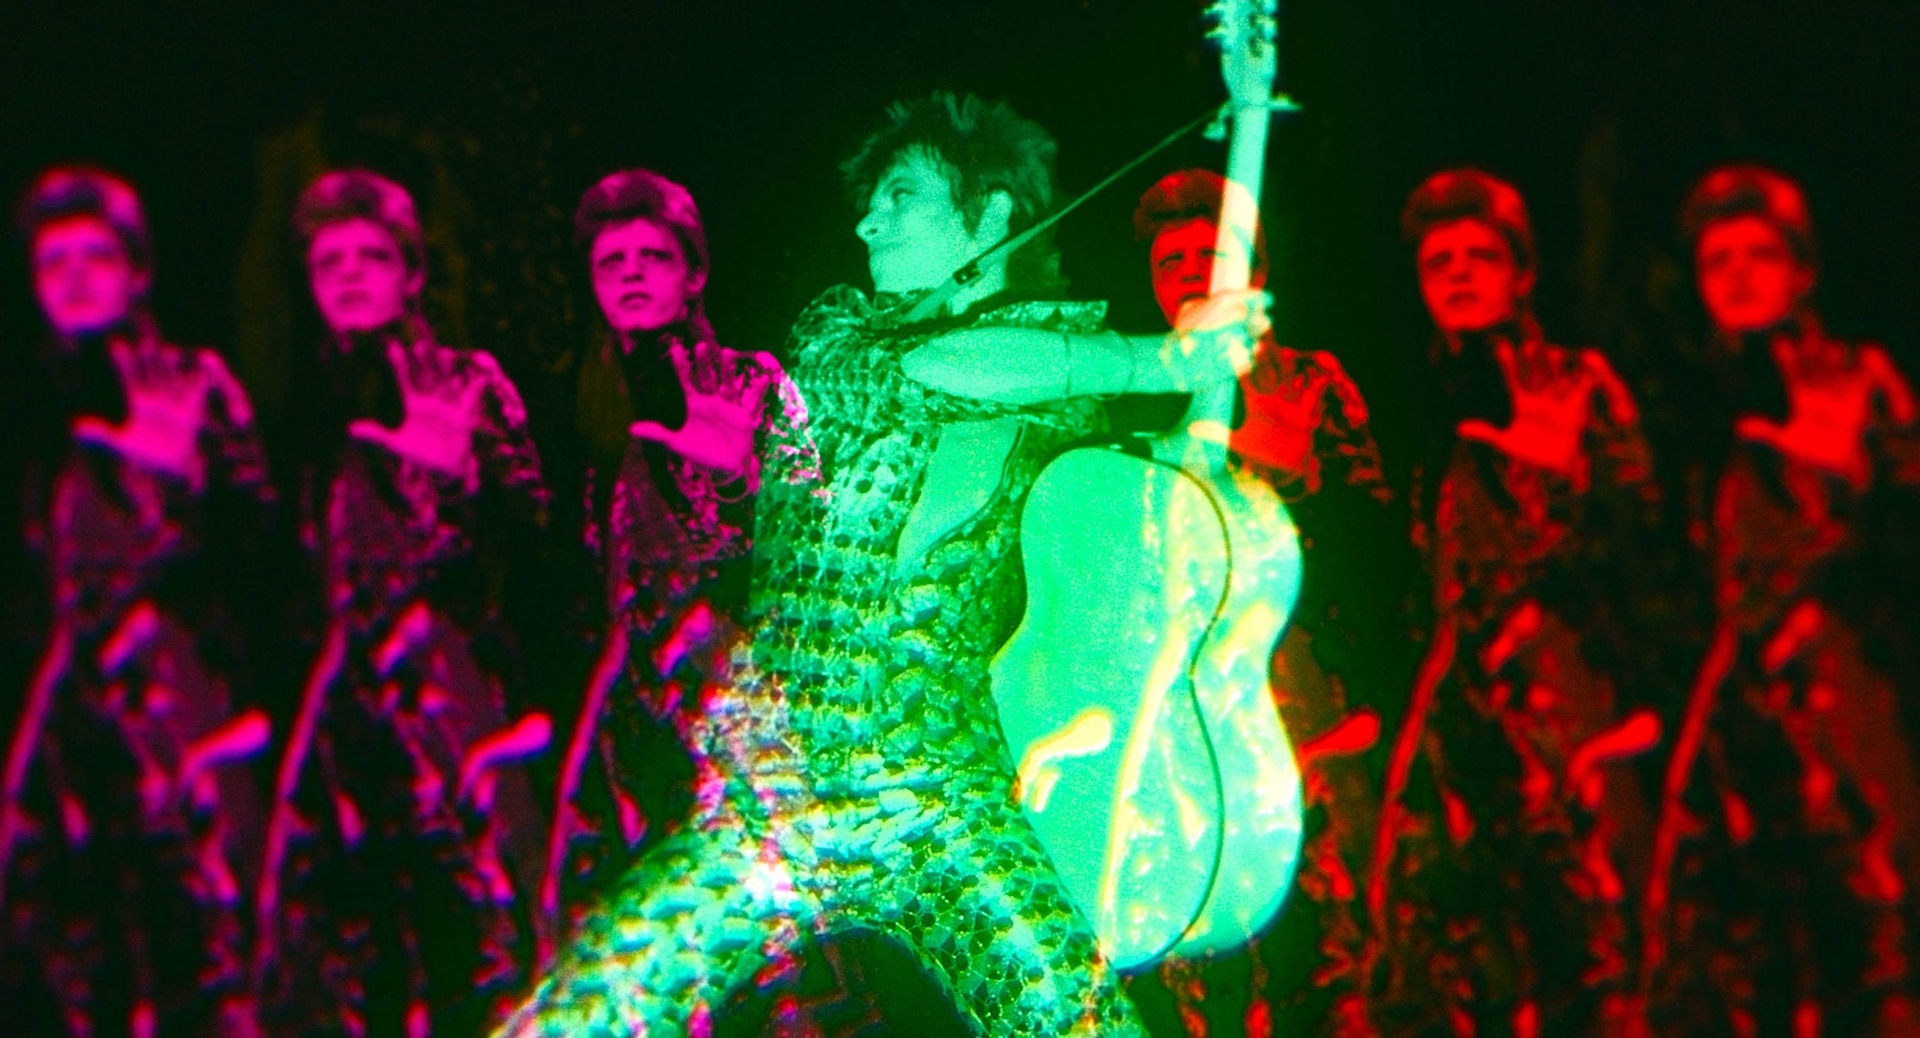 A Andy Warhol like triple image of David Bowie on guitar from Moonage Daydream